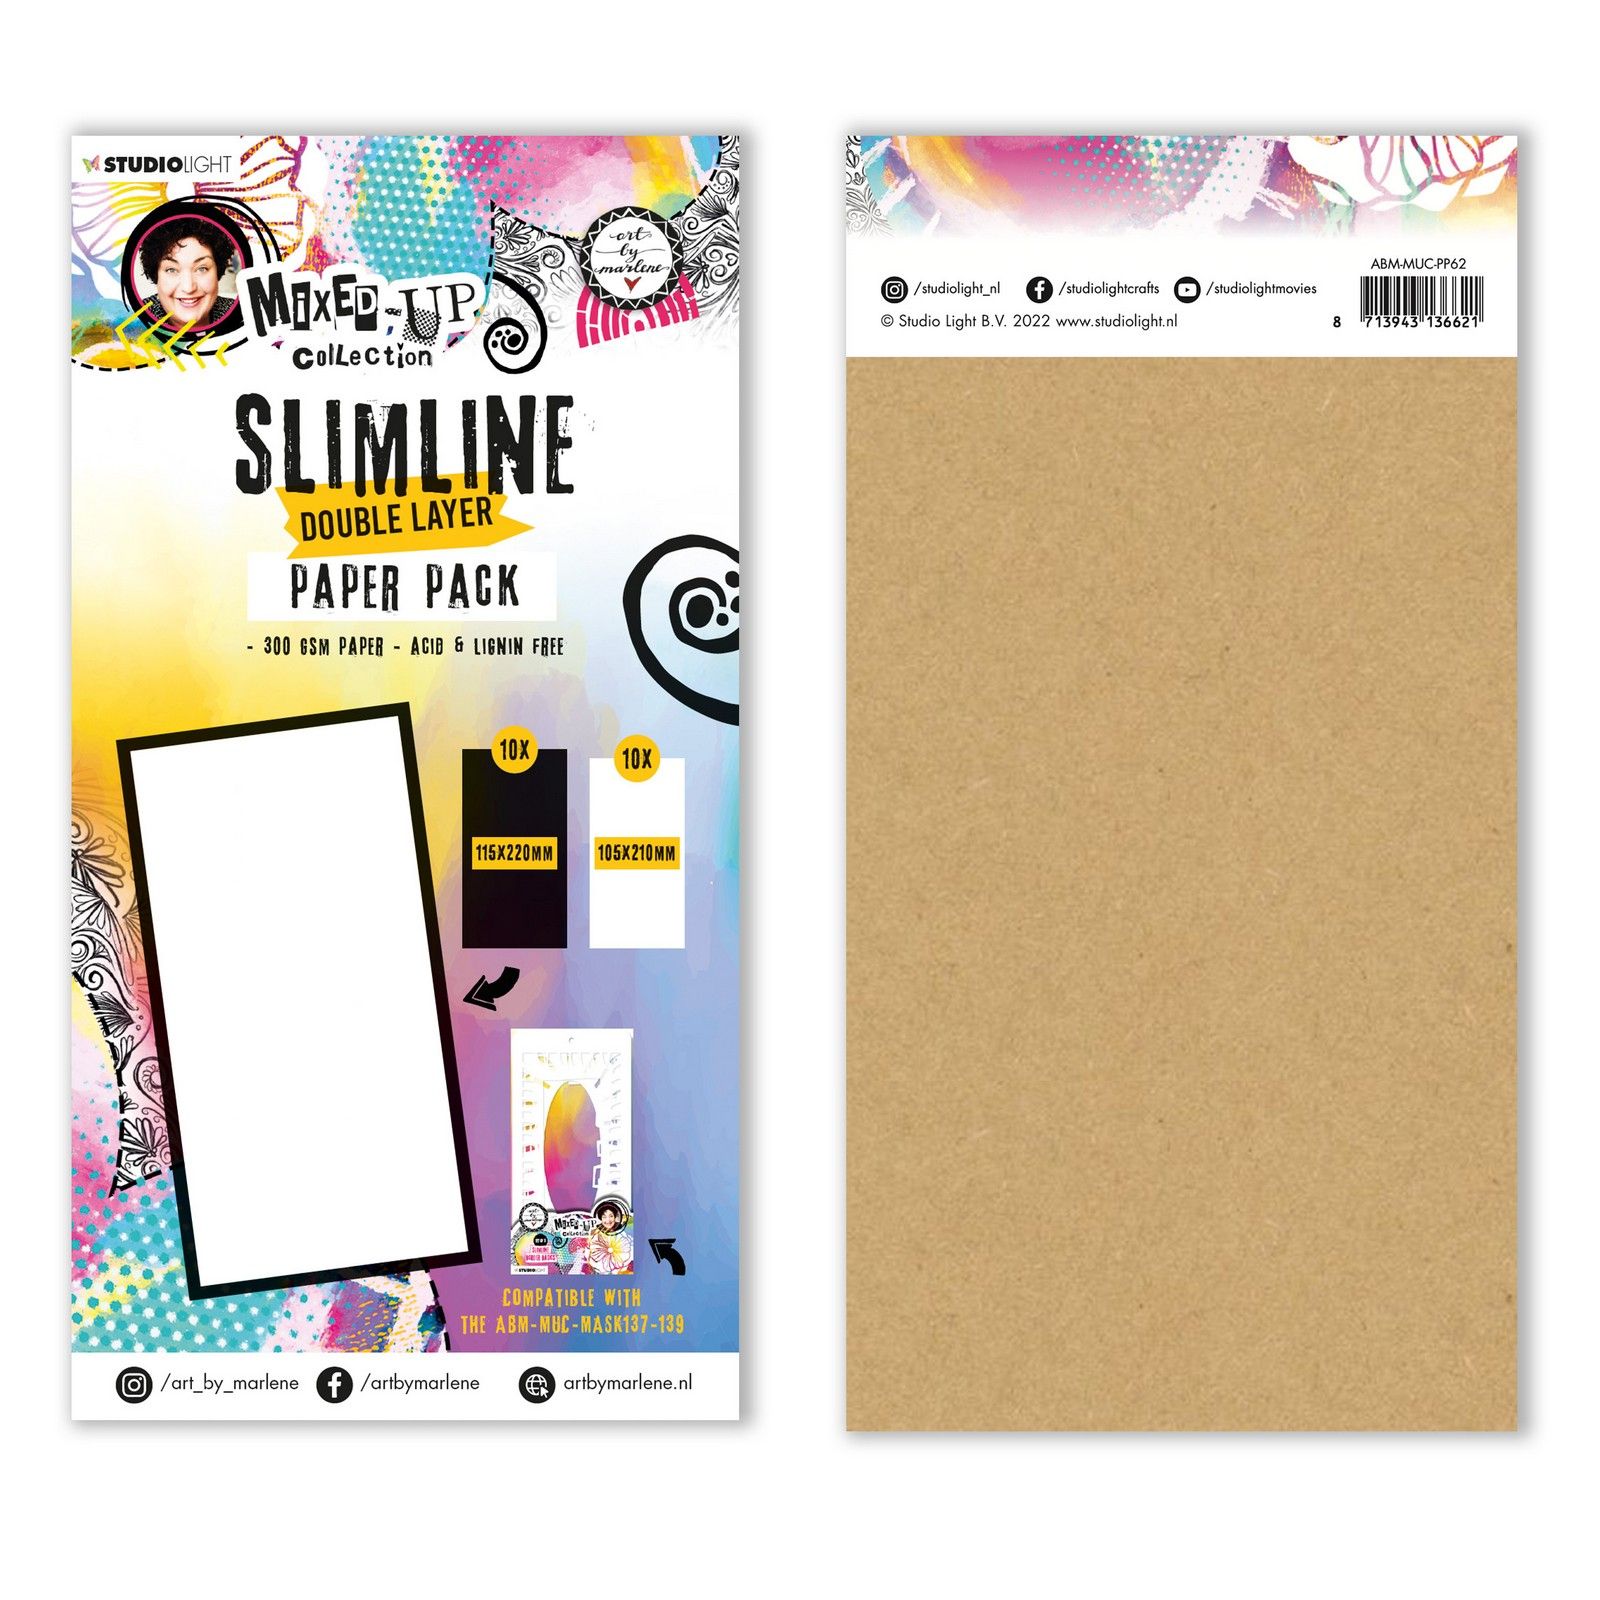 Studio Light • Mixed-Up Collection Paper Pack Slimline Double Layer